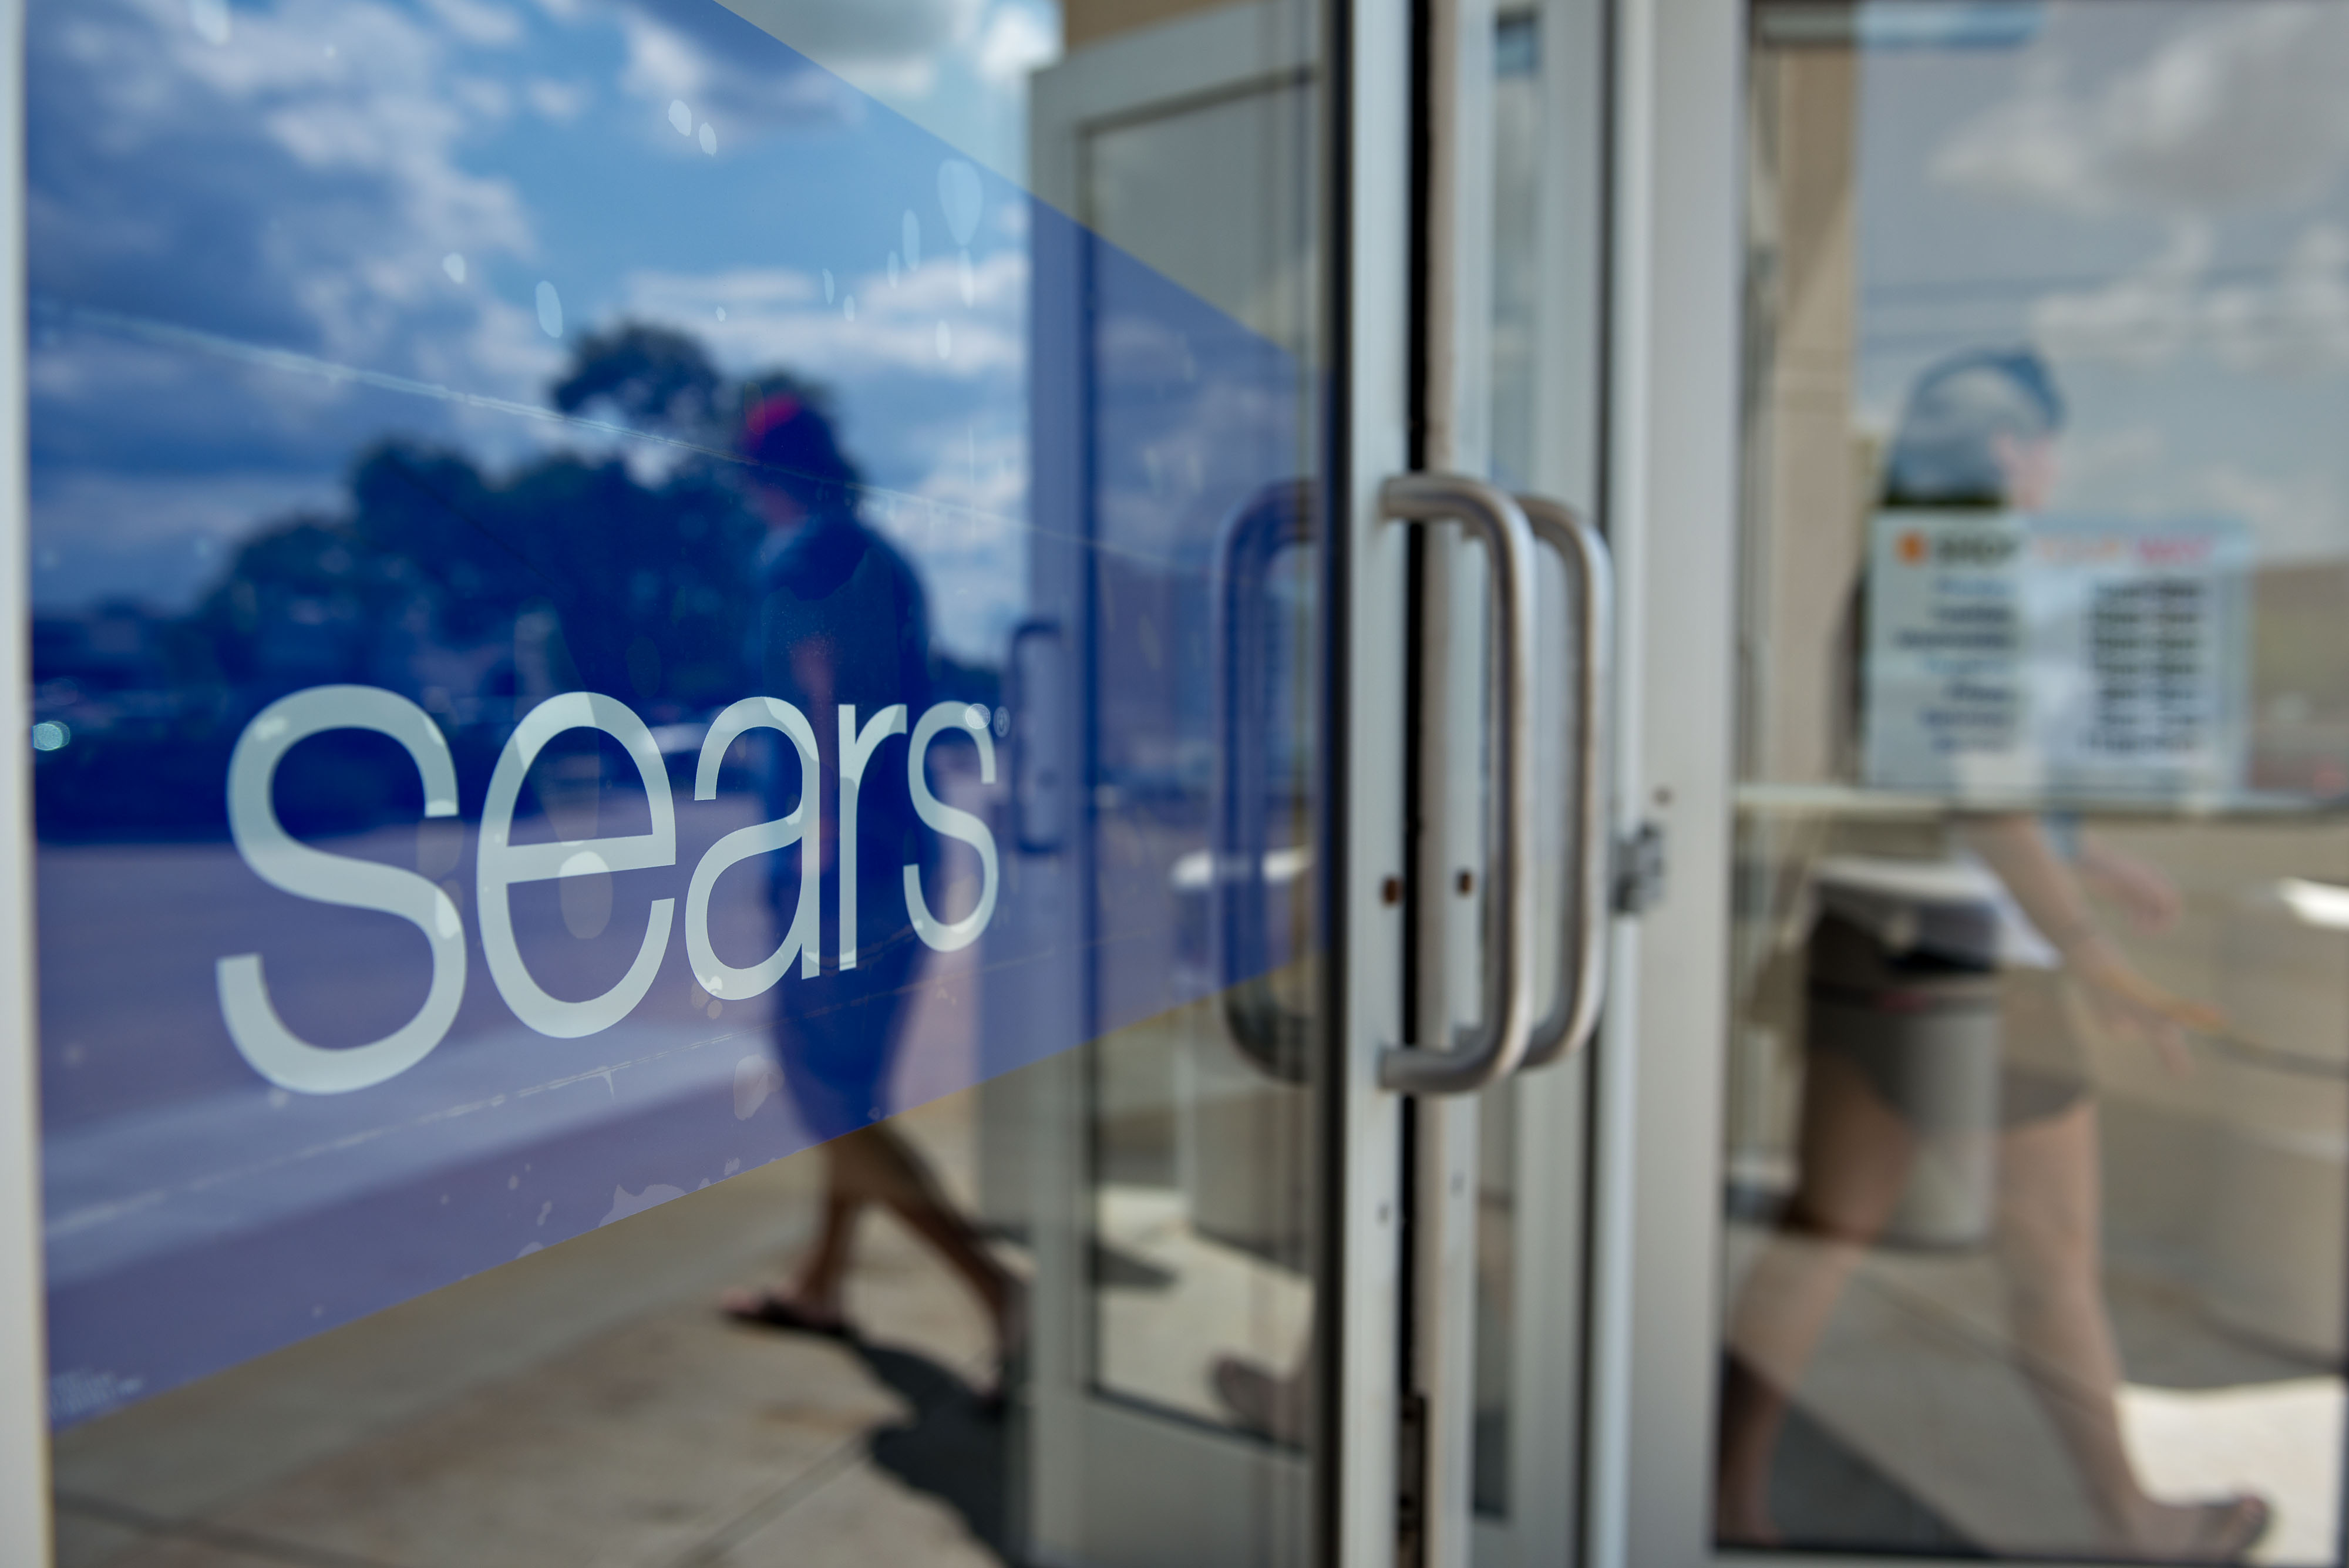 A shopper exits a Sears store in Peoria, Illinois.